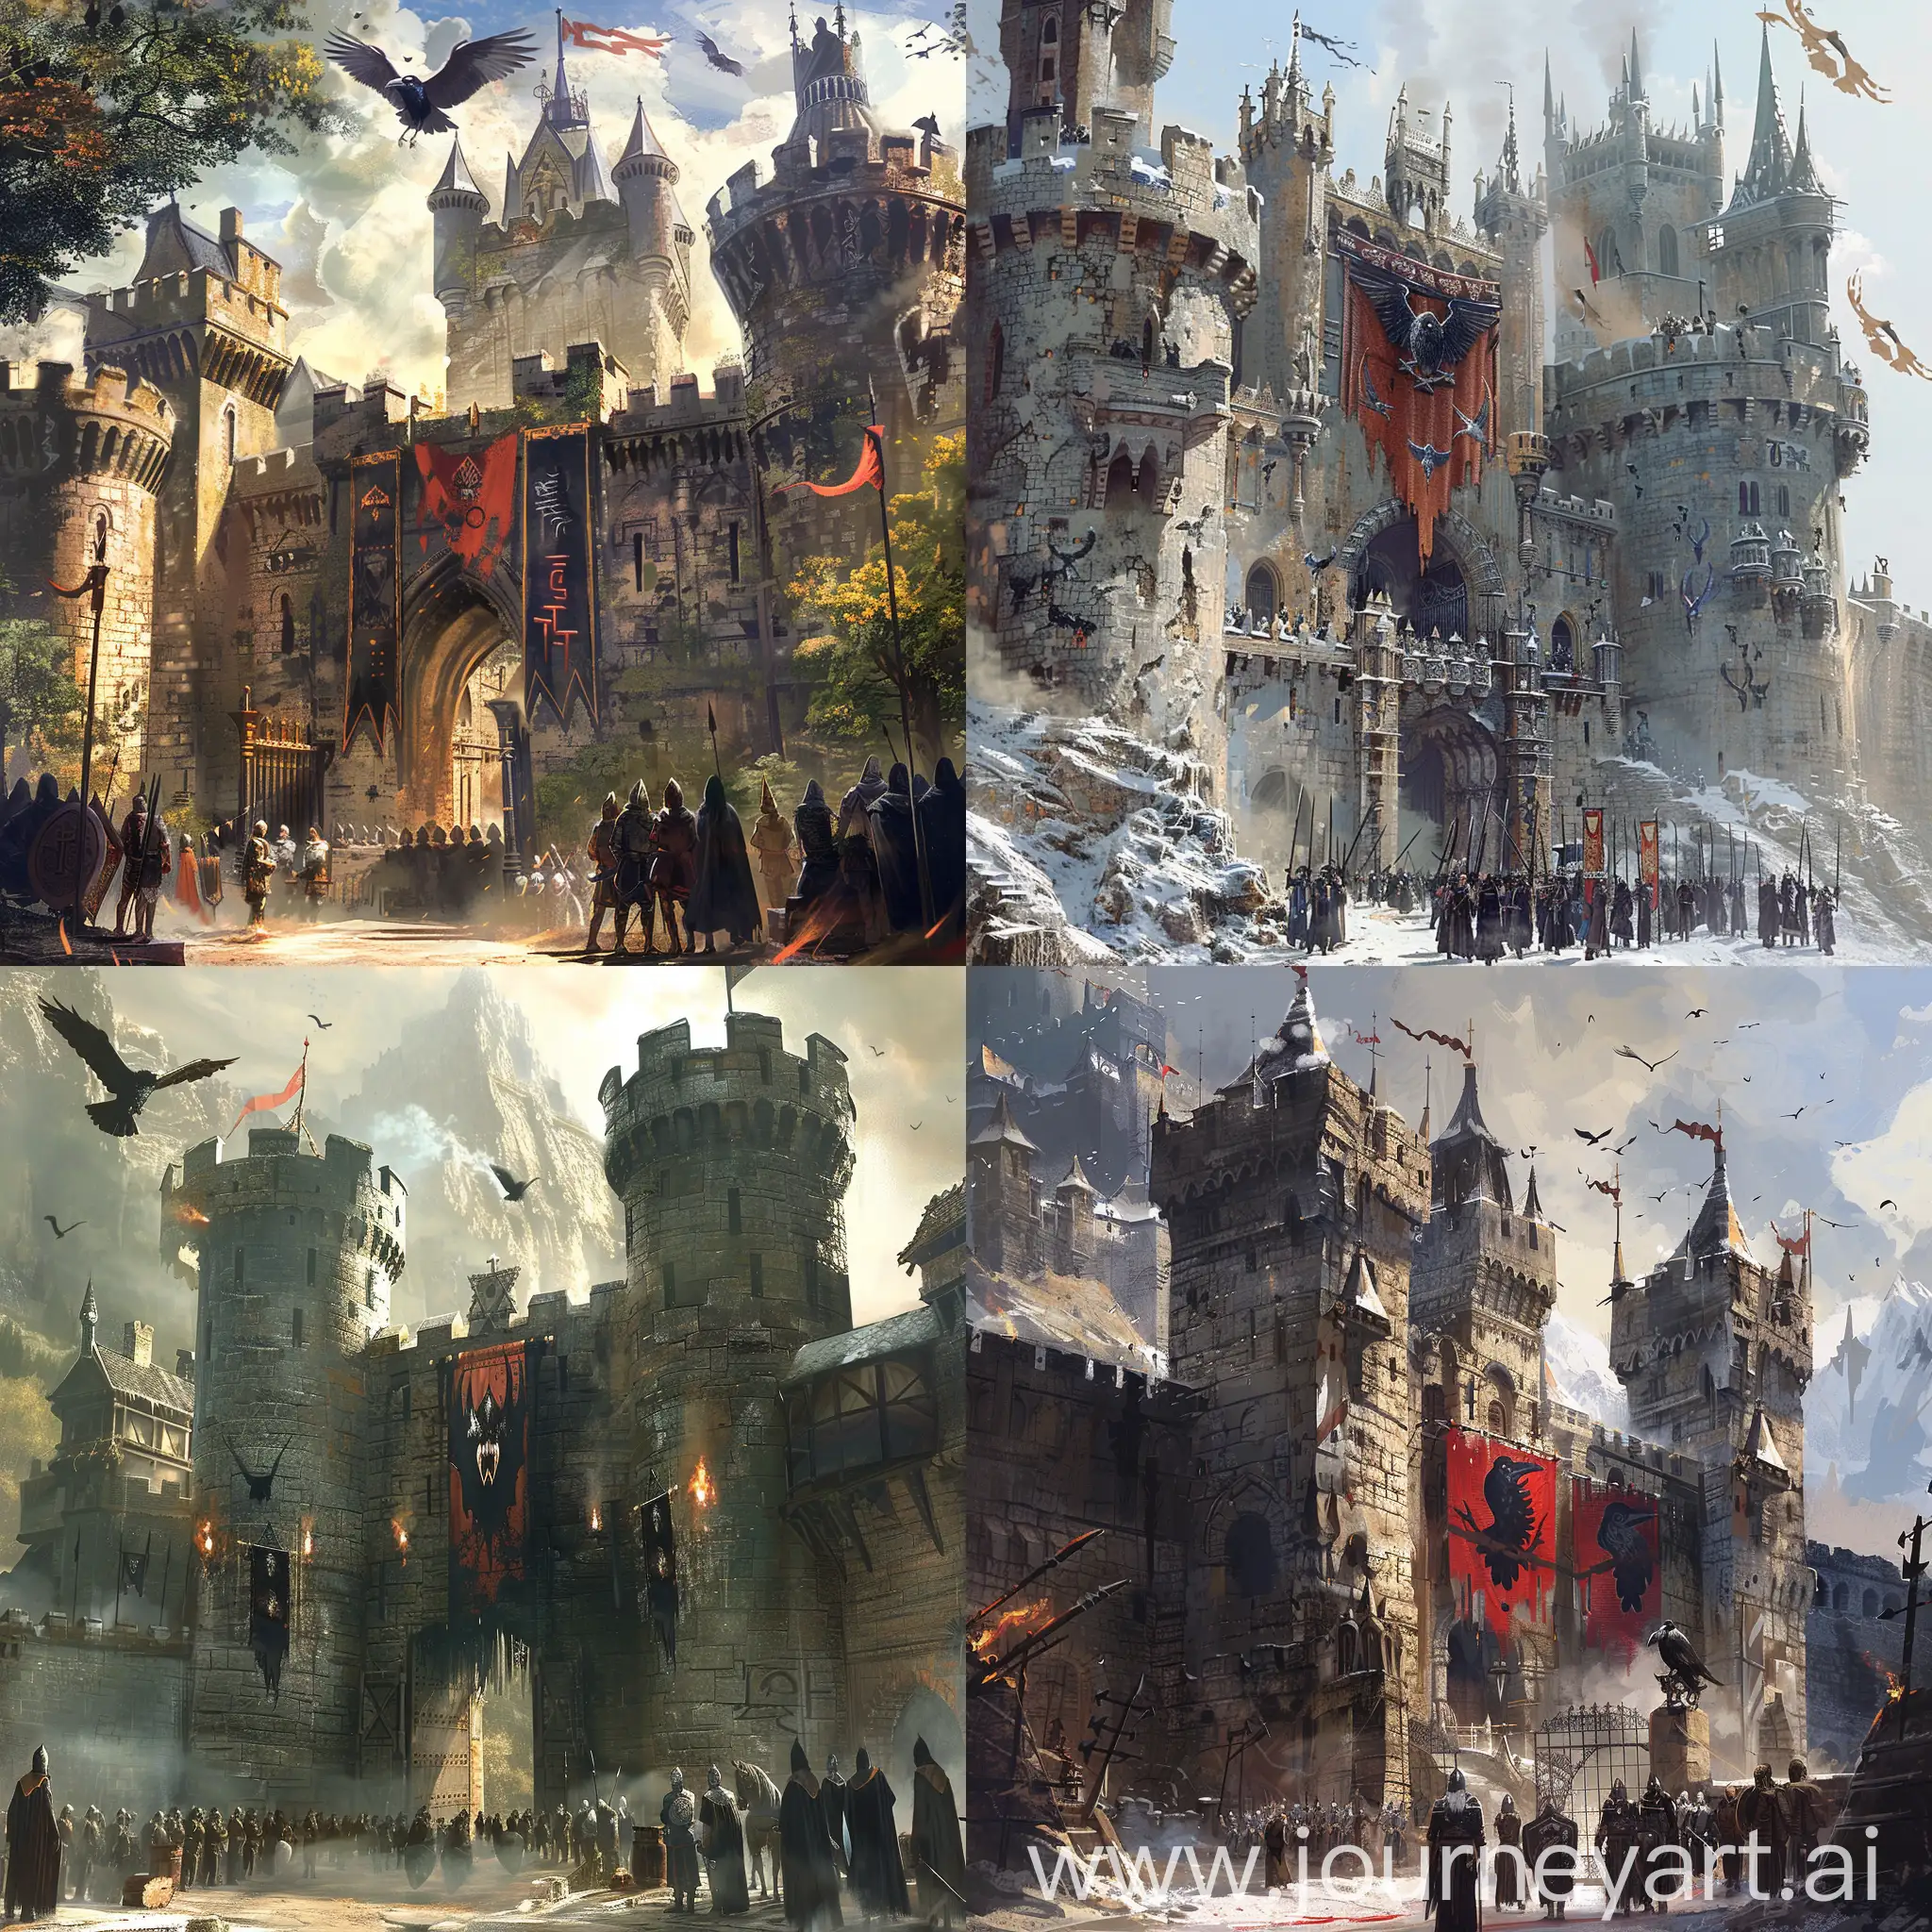 a fantasy theme,guild castle with raven banner,in front of the castle gate there are people waiting for something